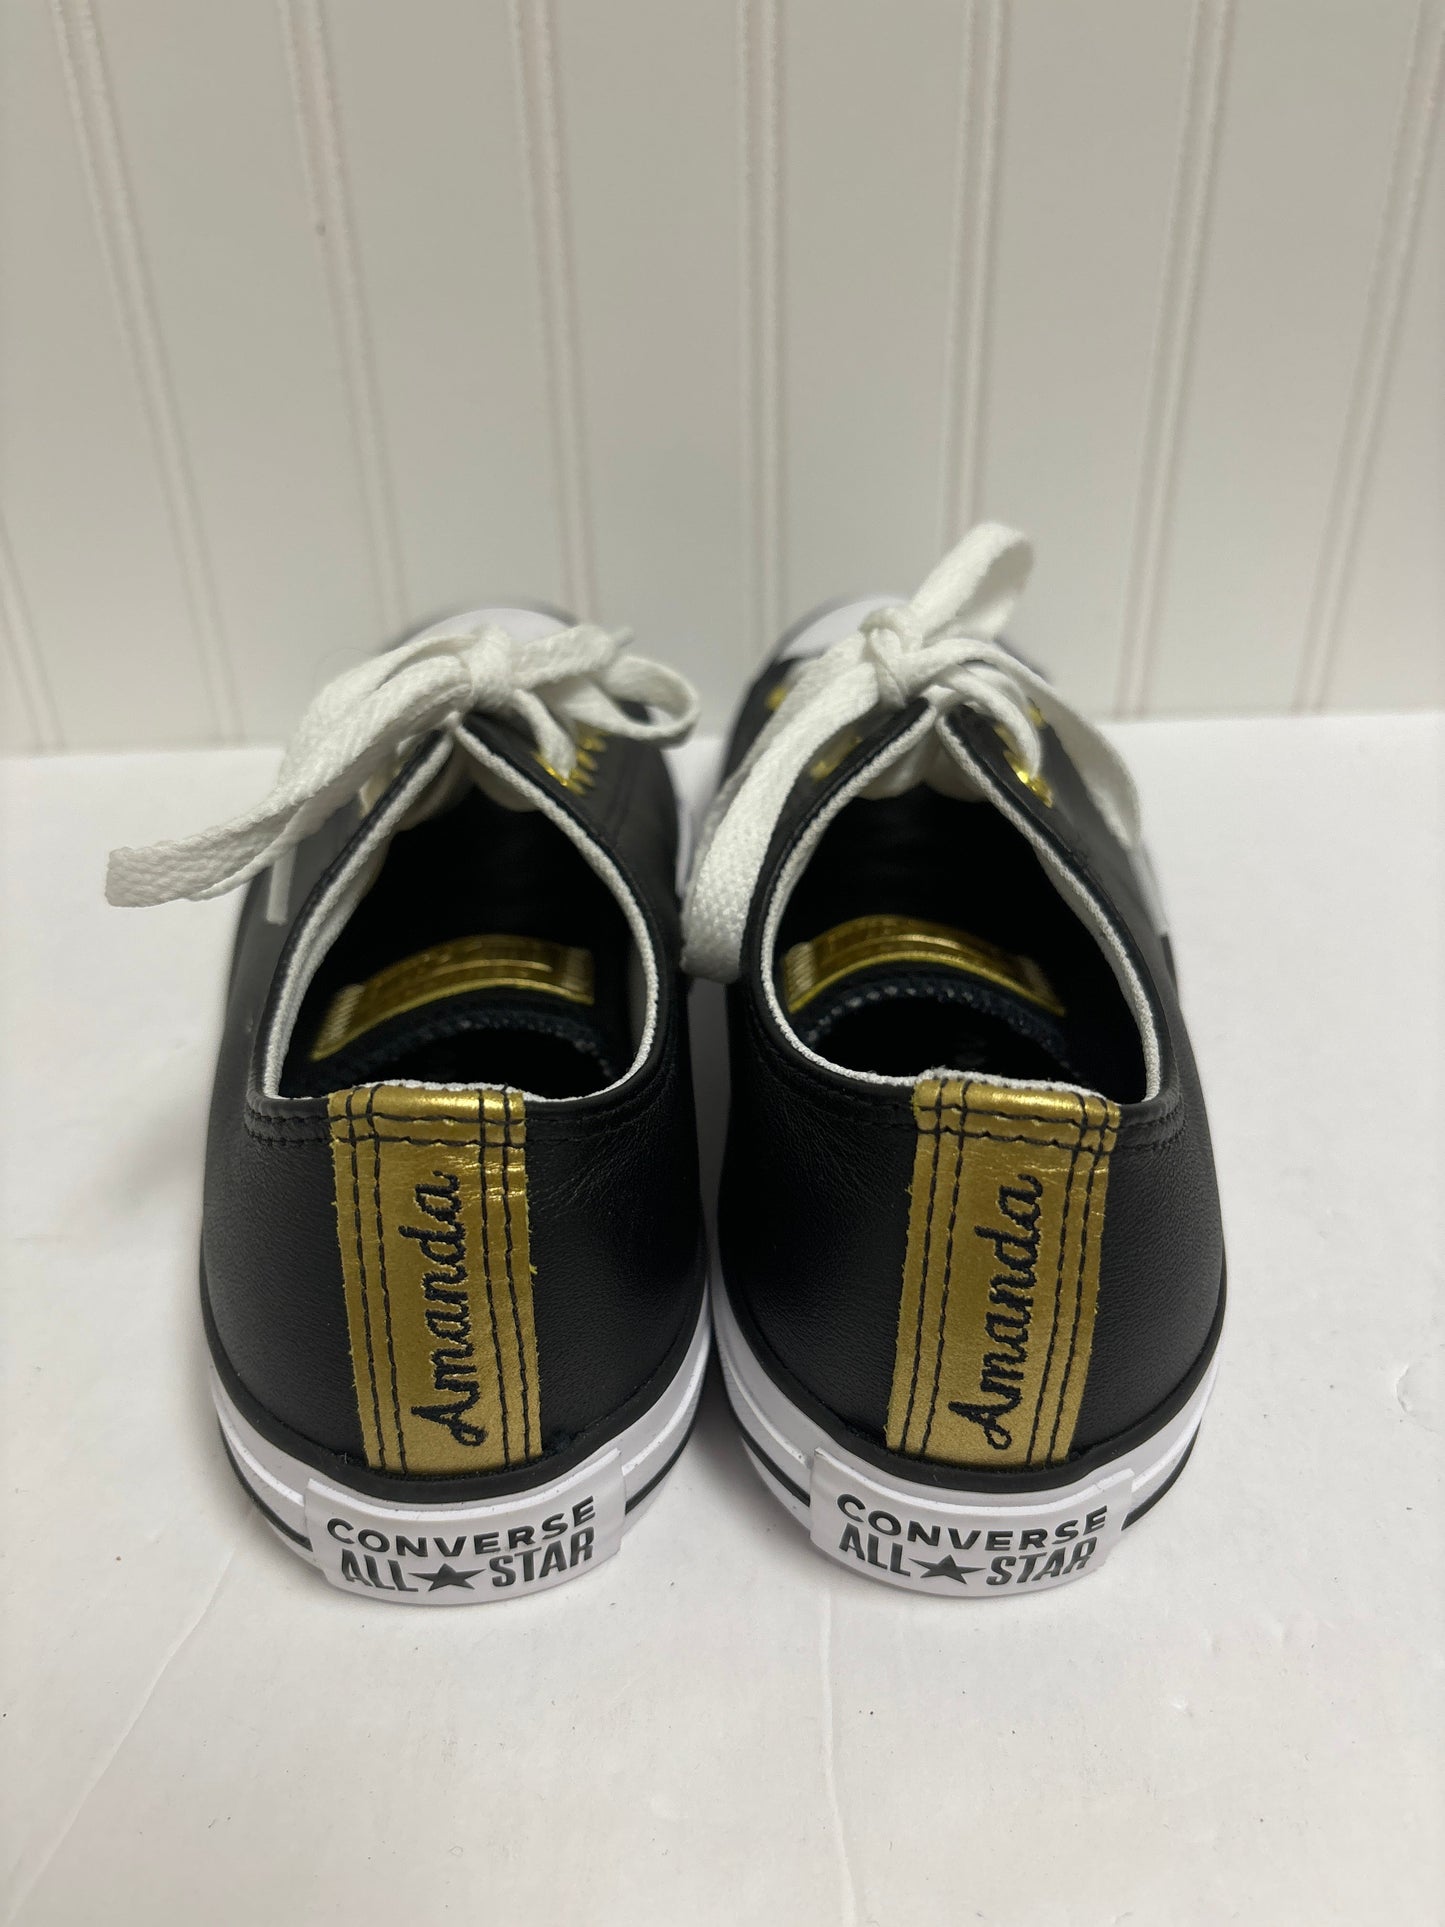 Black Shoes Sneakers Converse, Size 7.5